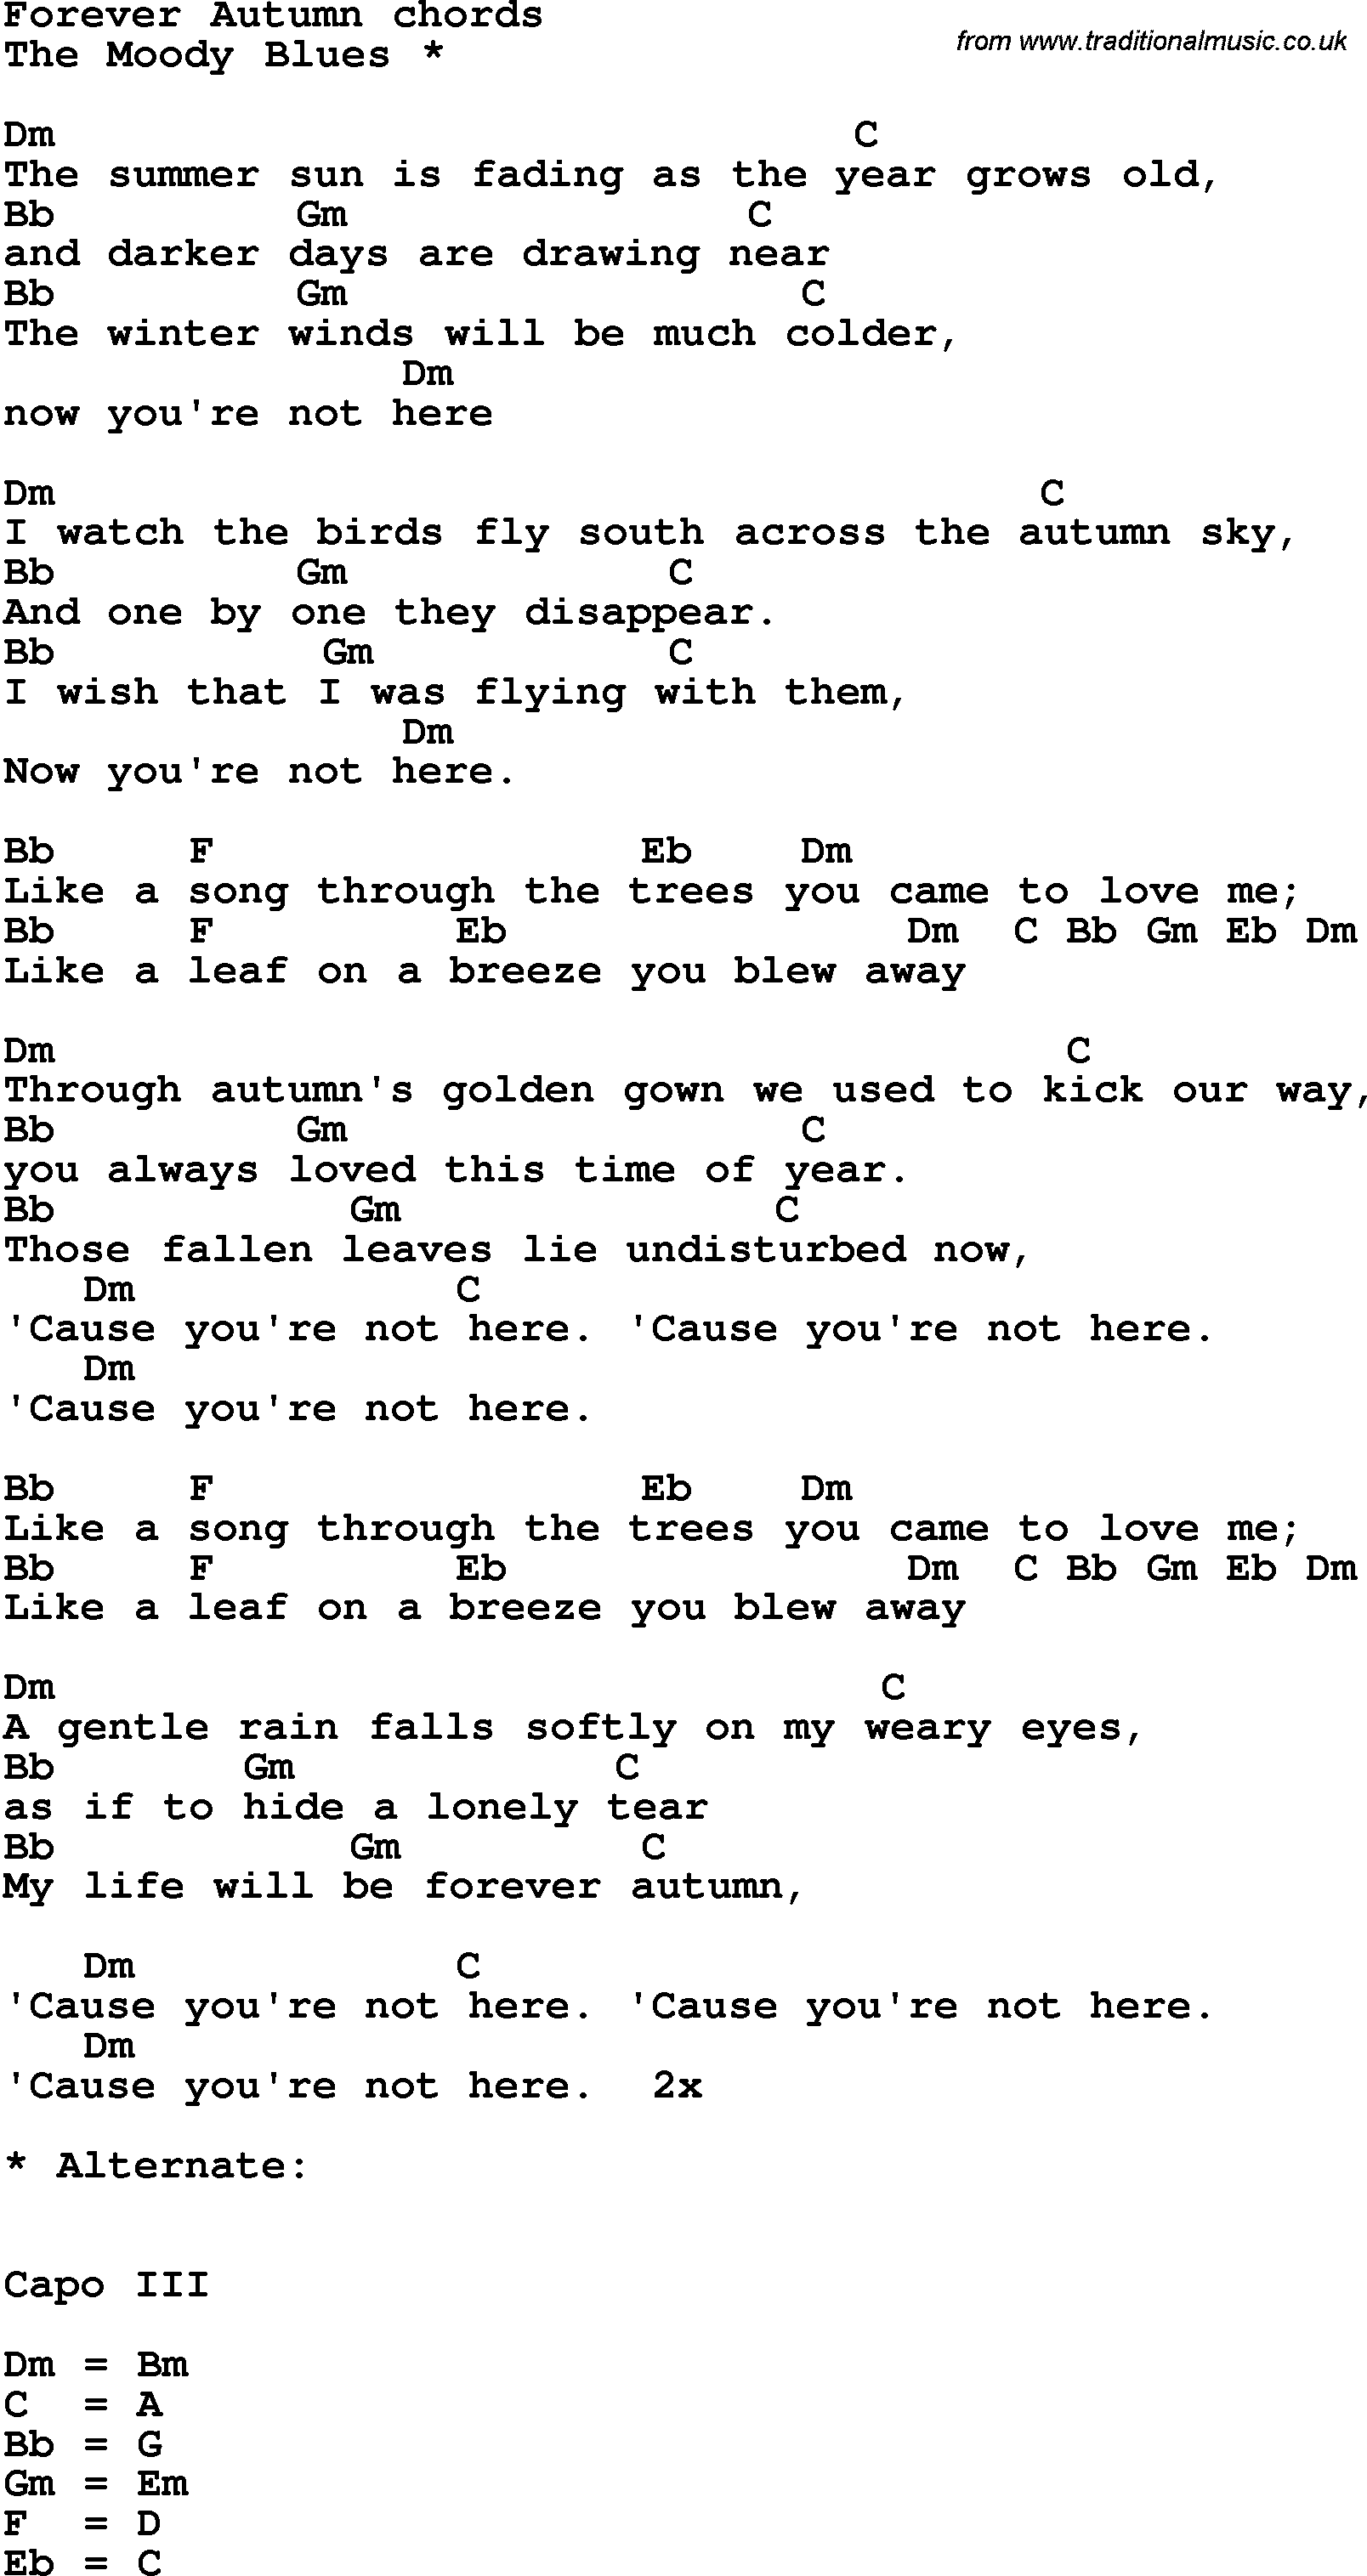 Song Lyrics with guitar chords for Forever Autumn